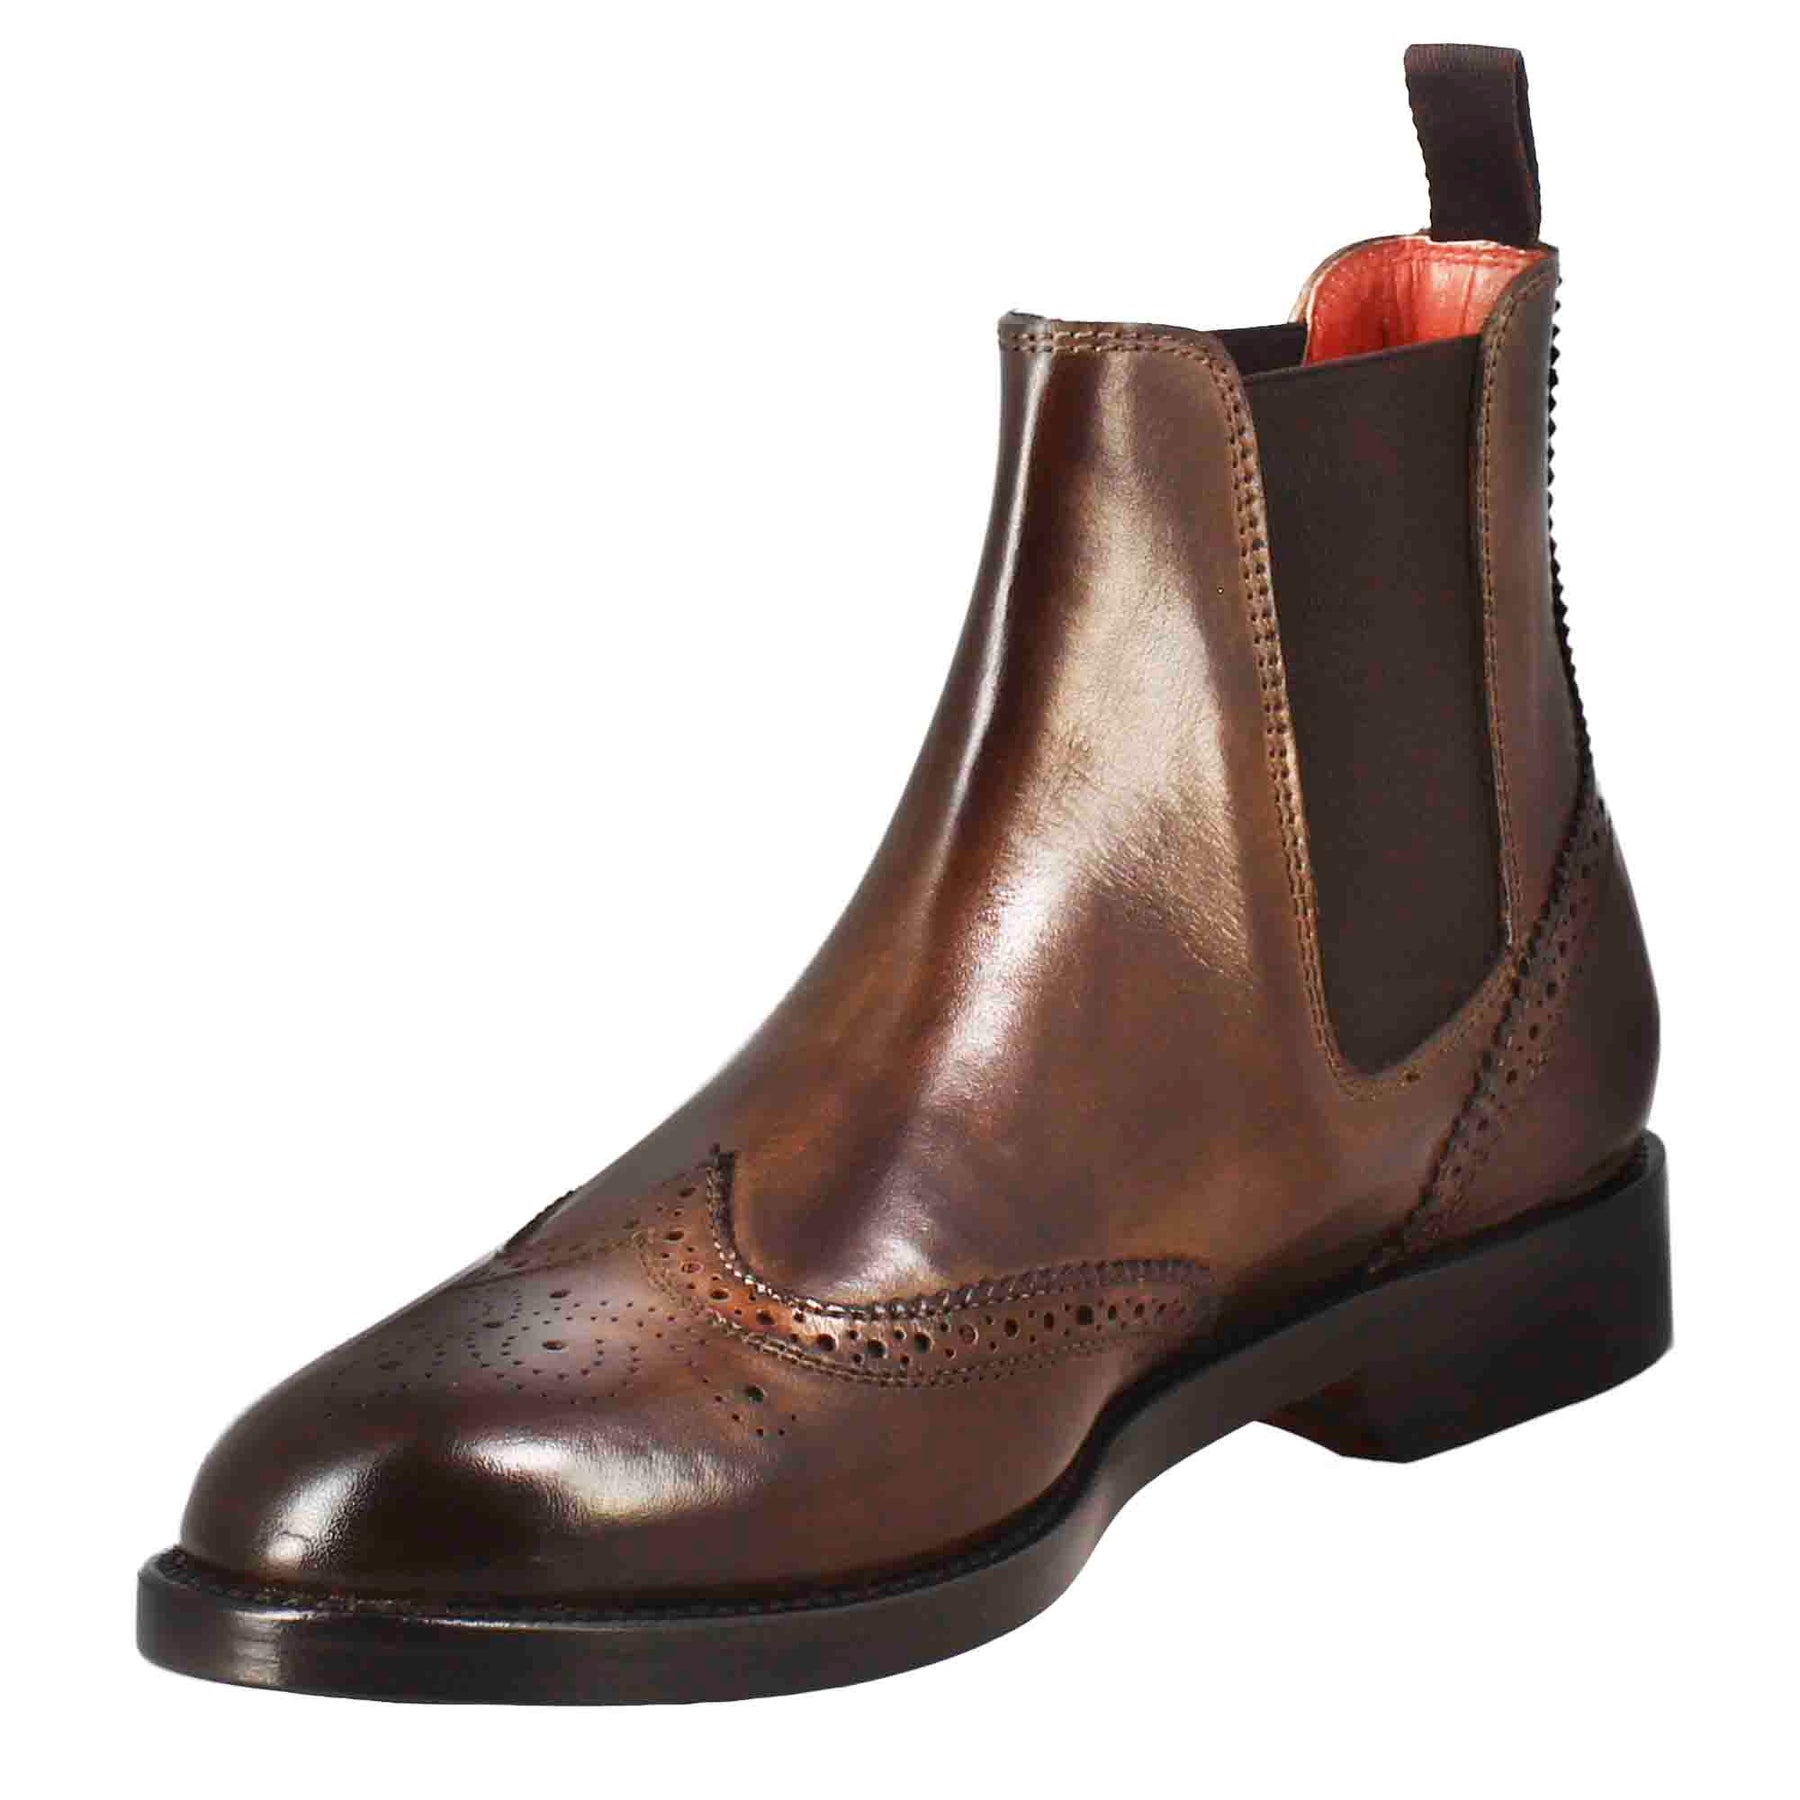 Women's Chelsea boot with brogue details in dark brown leather